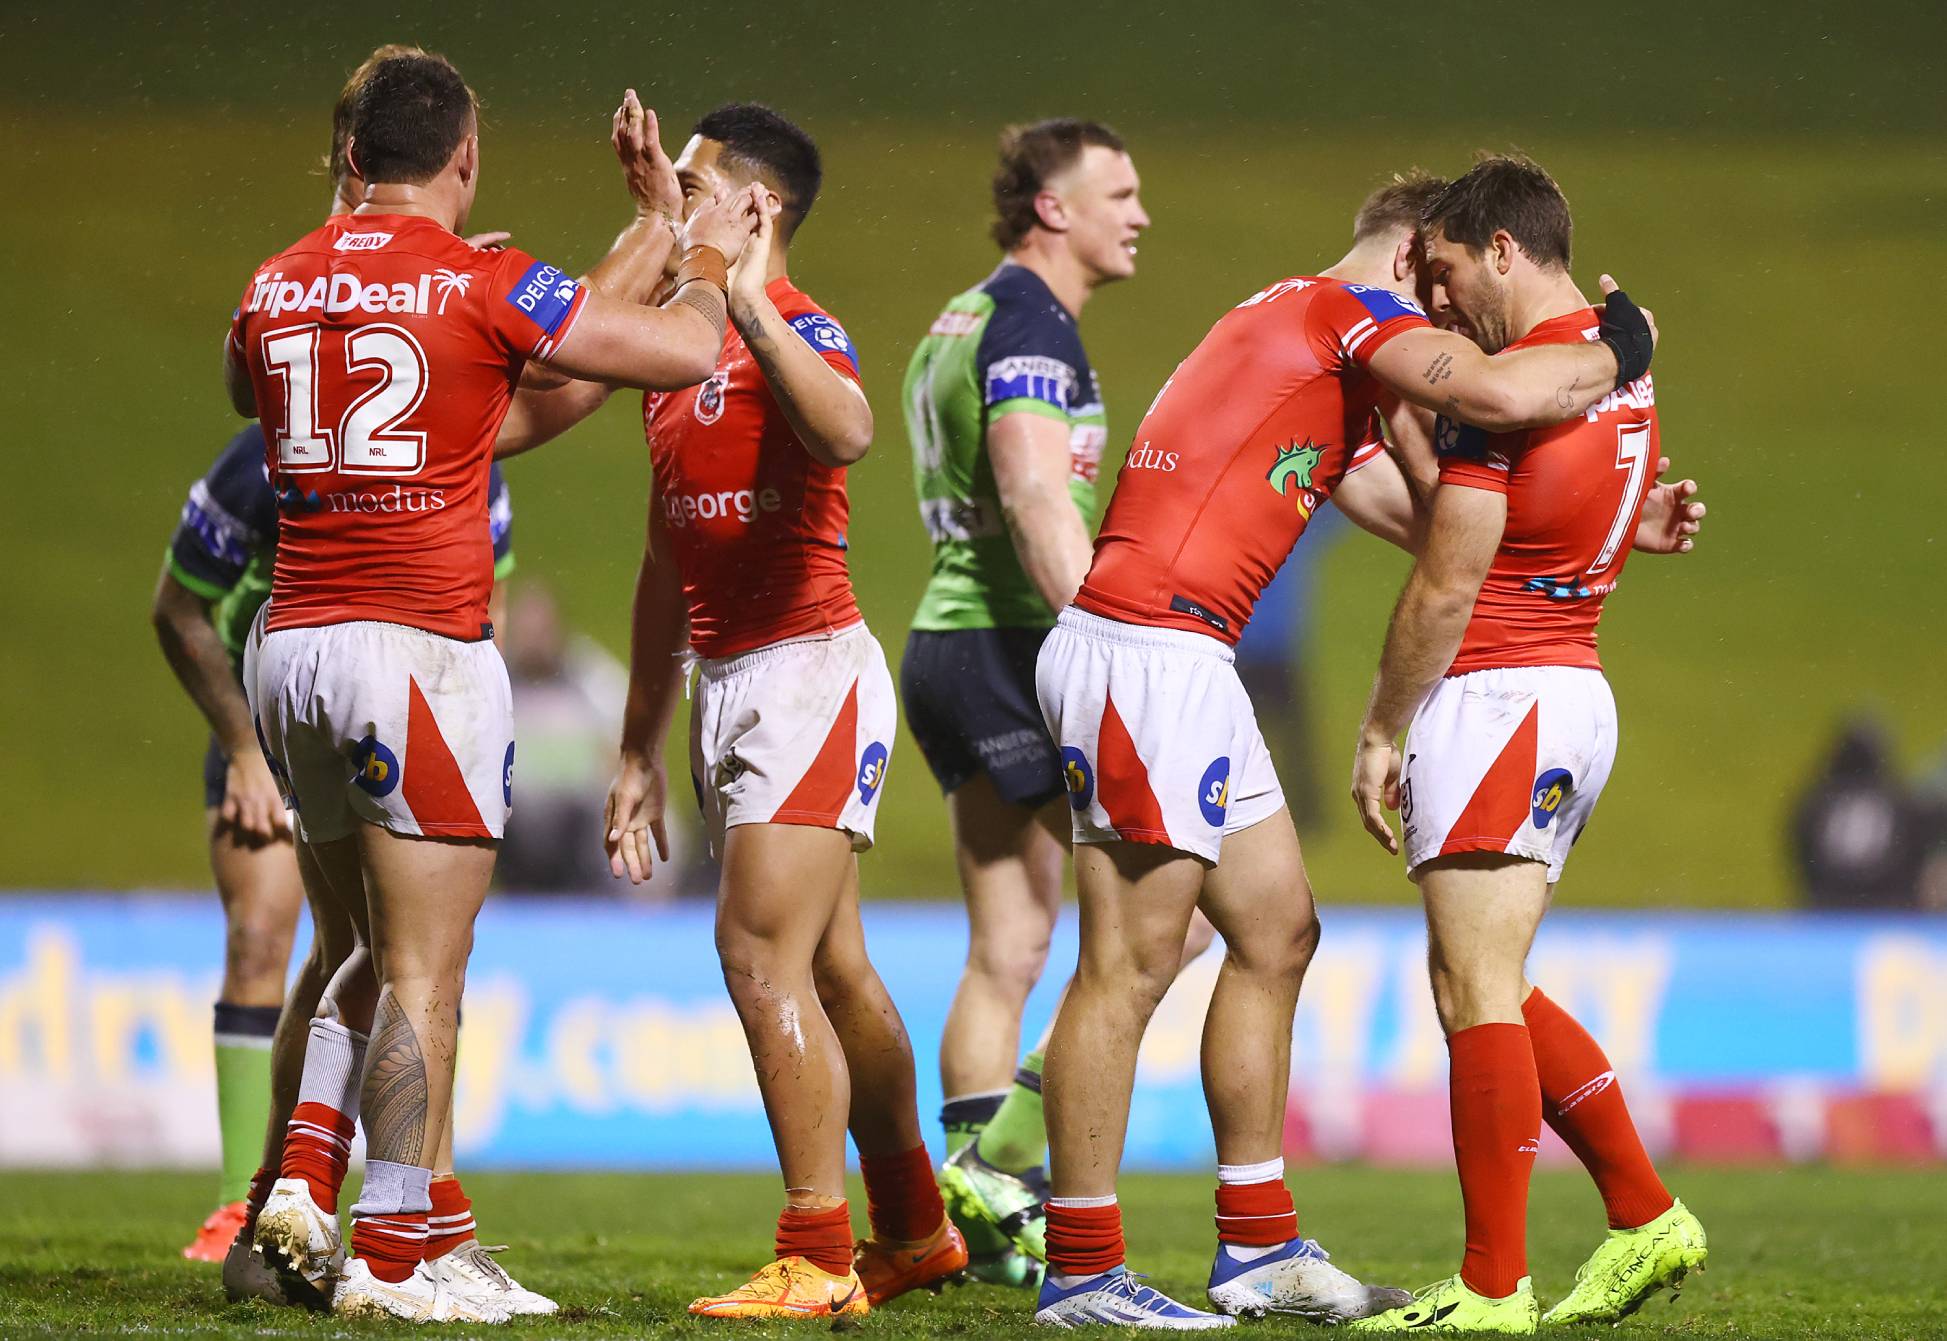 WOLLONGONG, AUSTRALIA - JULY 03: Dragon players celebrate winning the round 16 NRL match between the St George Illawarra Dragons and the Canberra Raiders at WIN Stadium, on July 03, 2022, in Wollongong, Australia. (Photo by Mark Nolan/Getty Images)